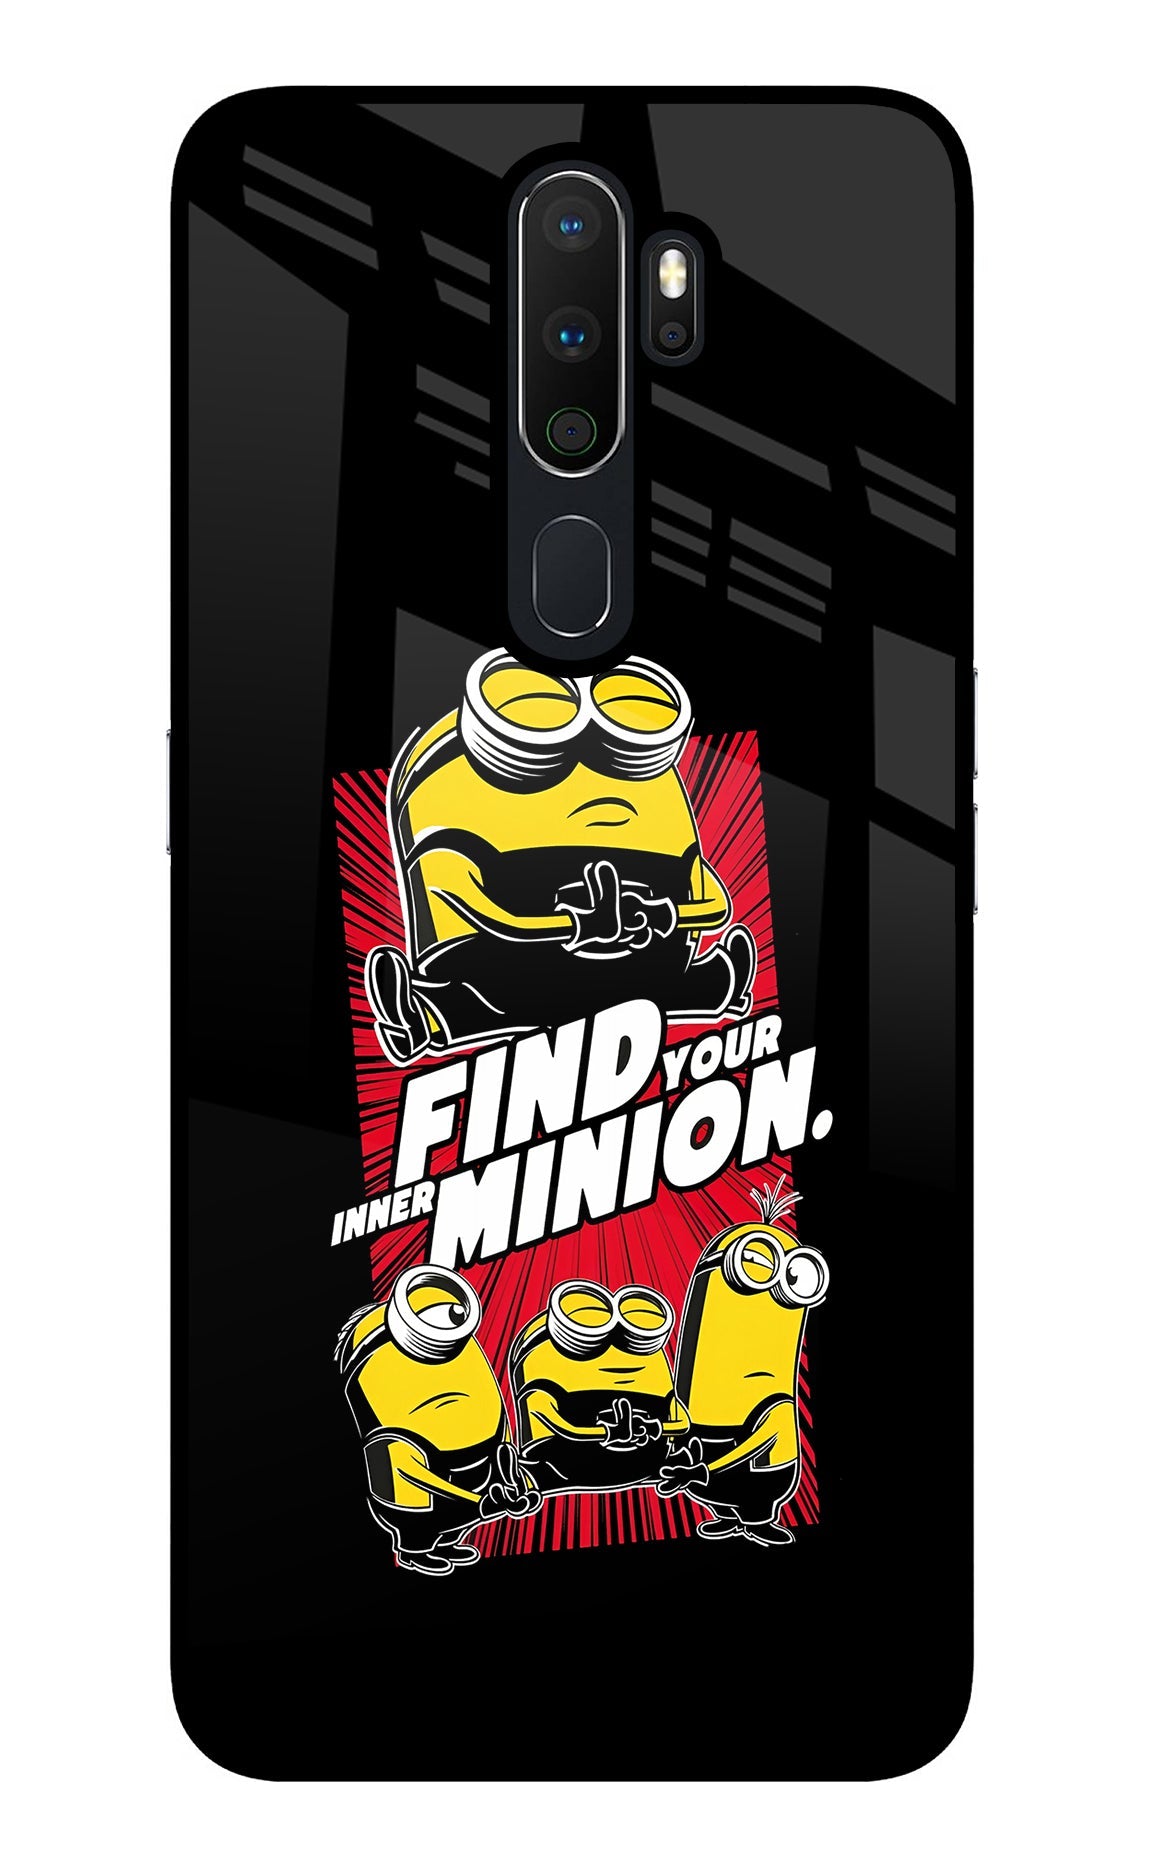 Find your inner Minion Oppo A5 2020/A9 2020 Glass Case